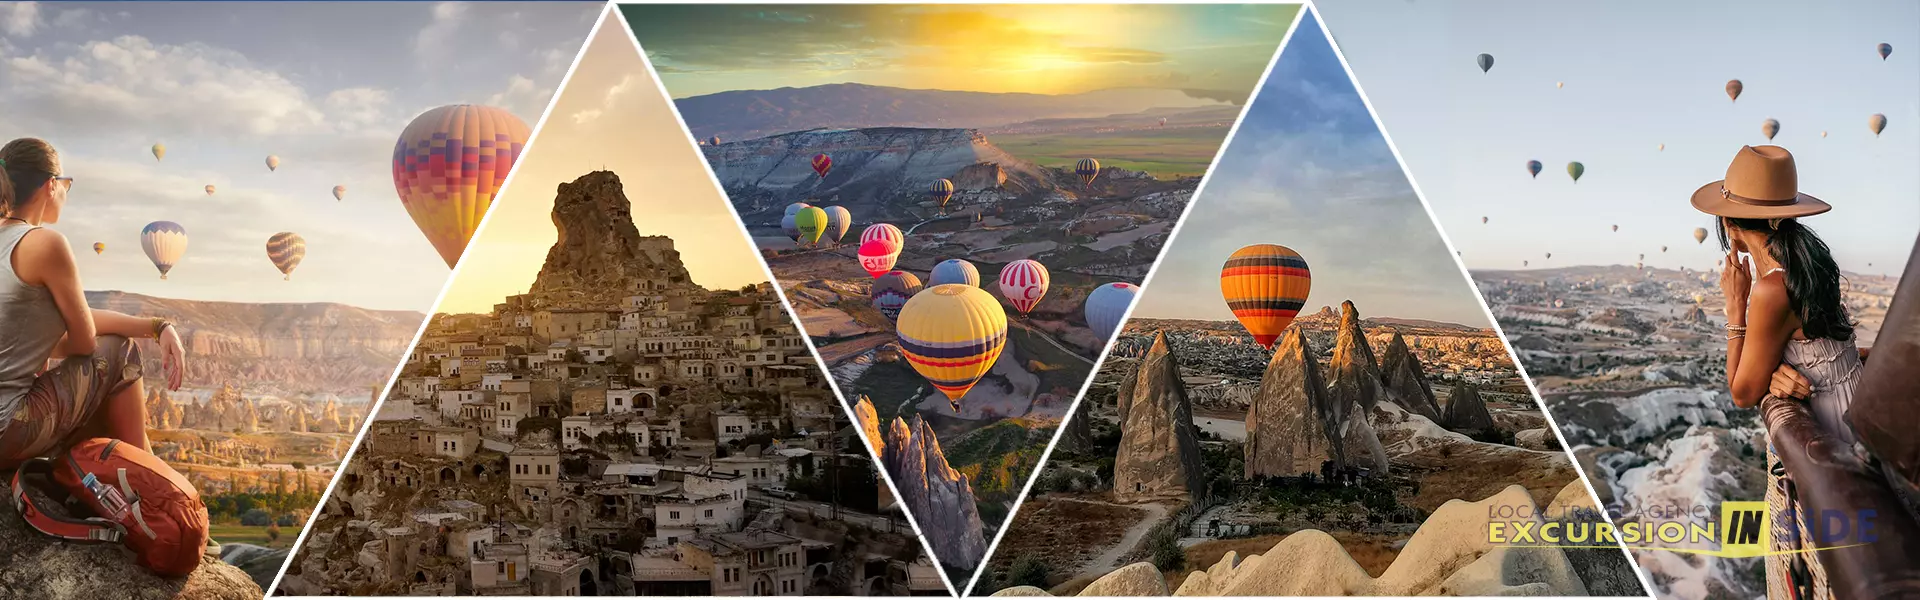 Cappadocia Tour From Side